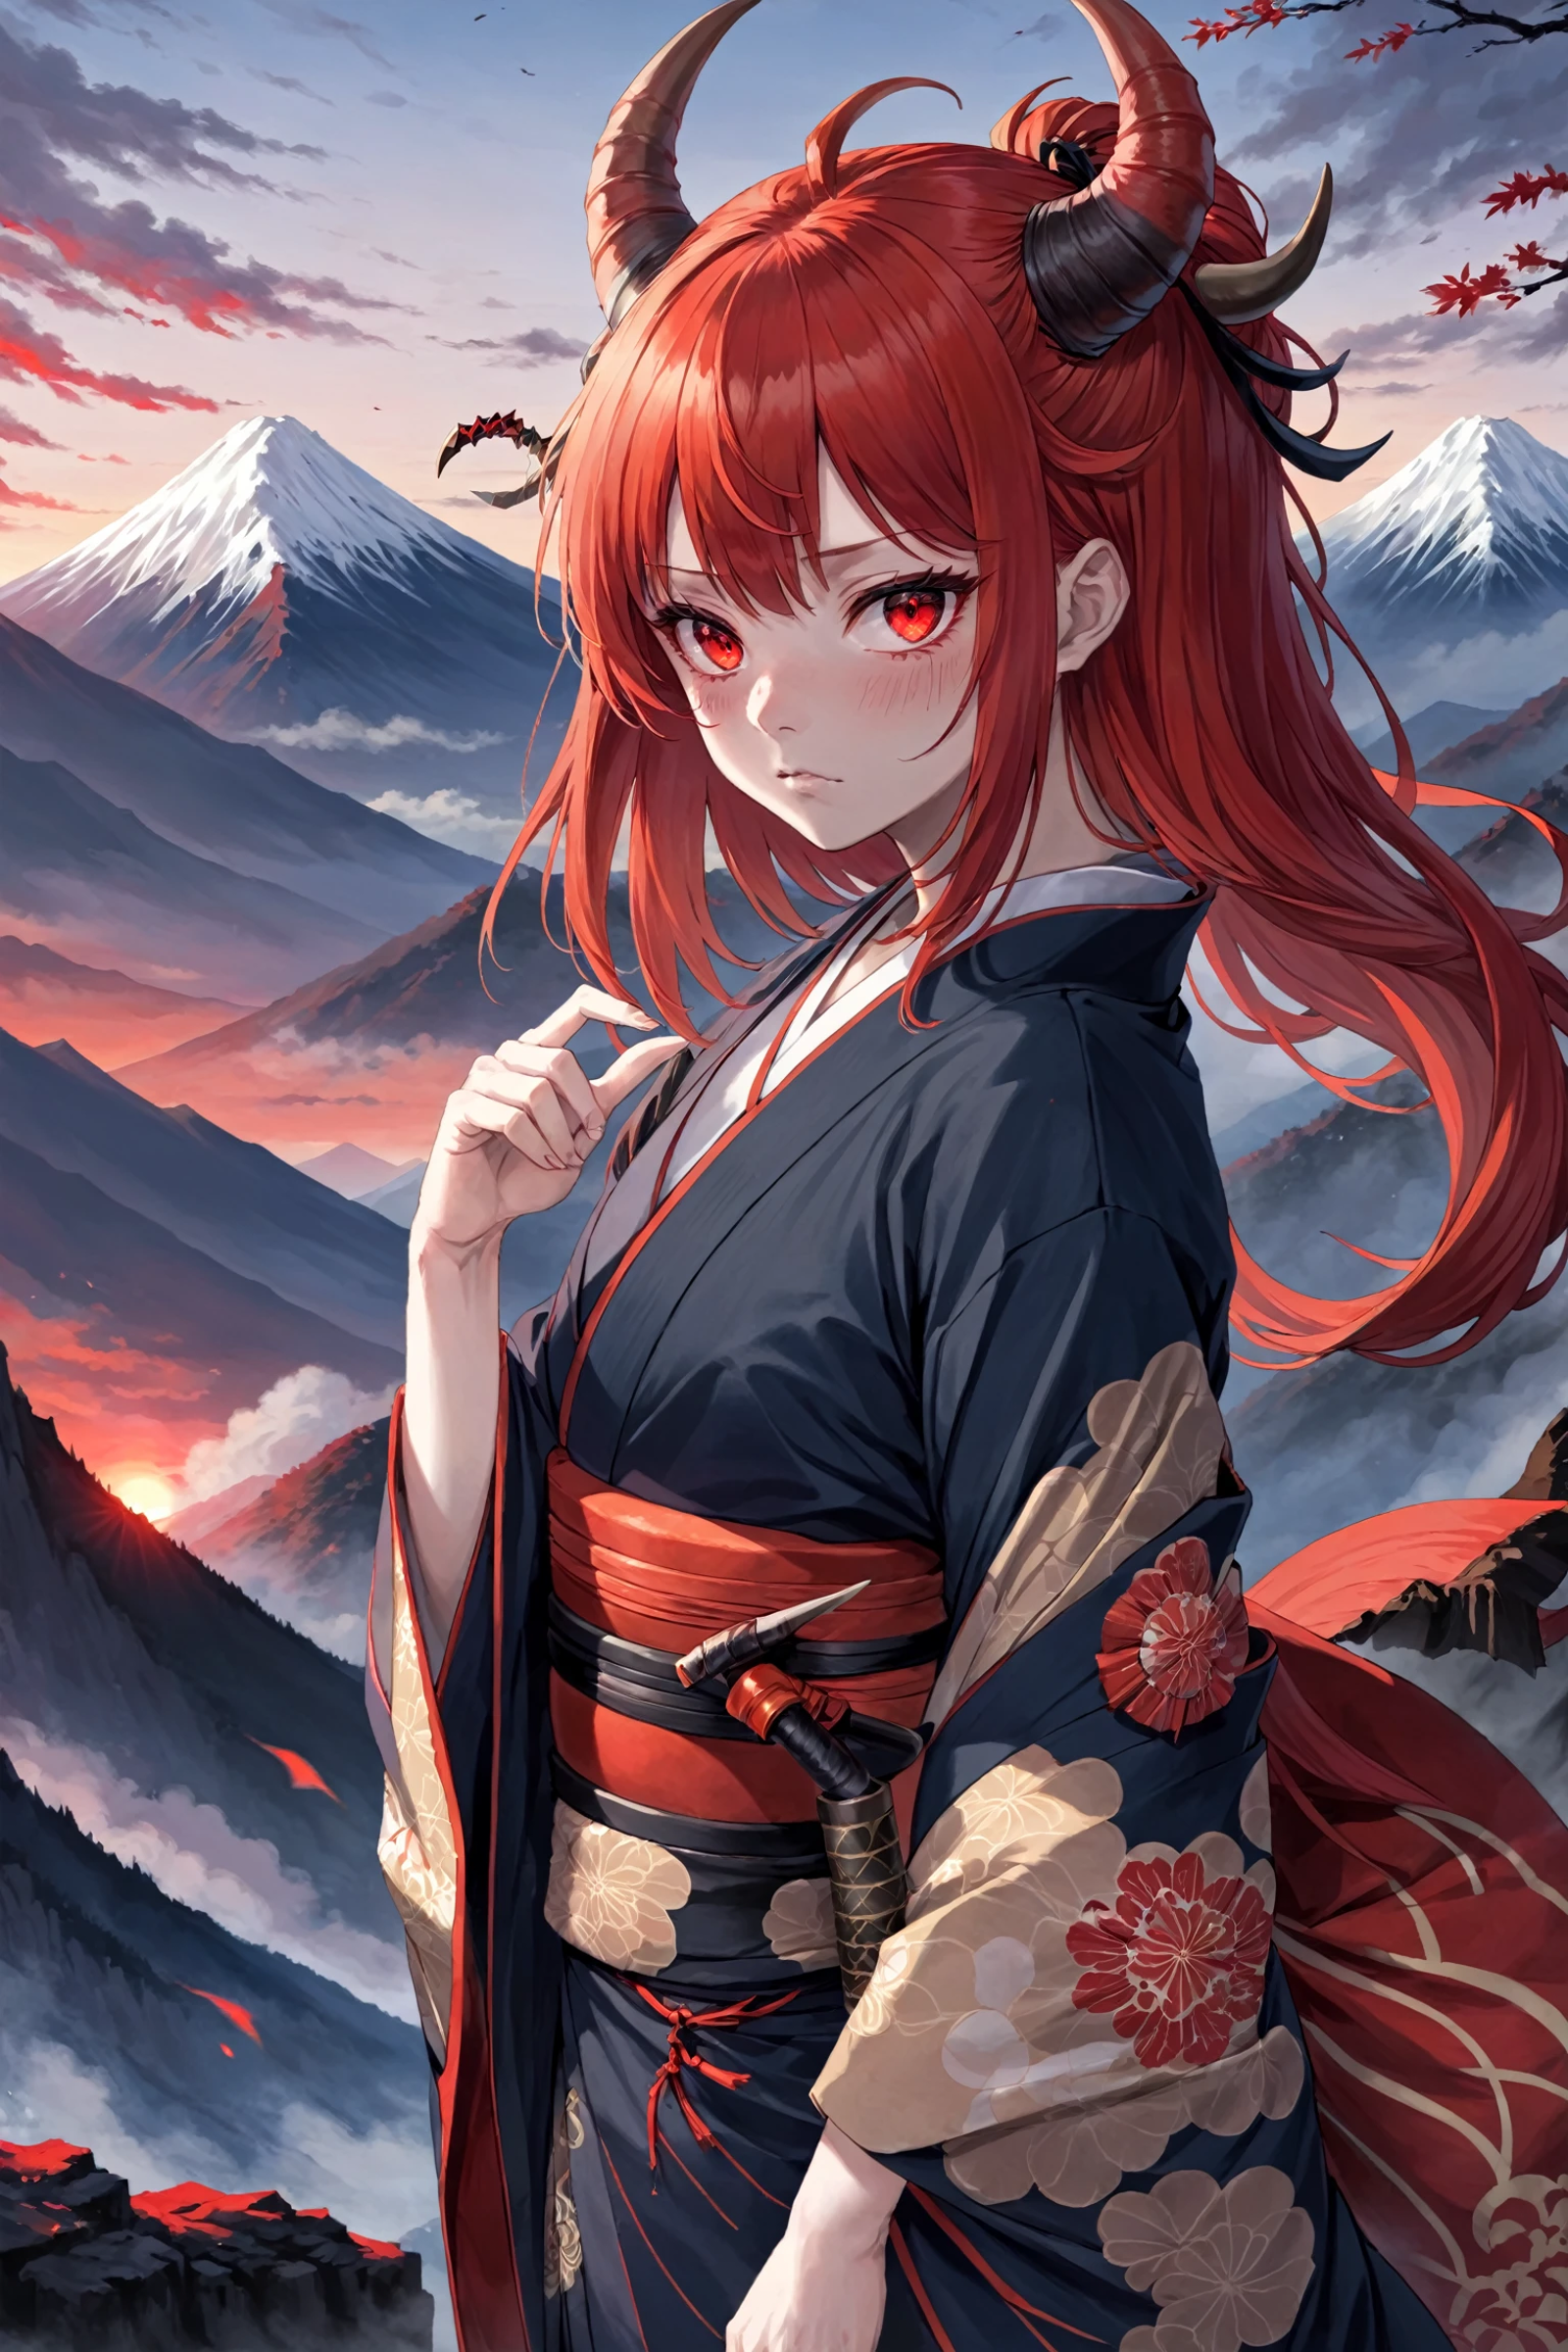 Anime girl with red hair and a sword.